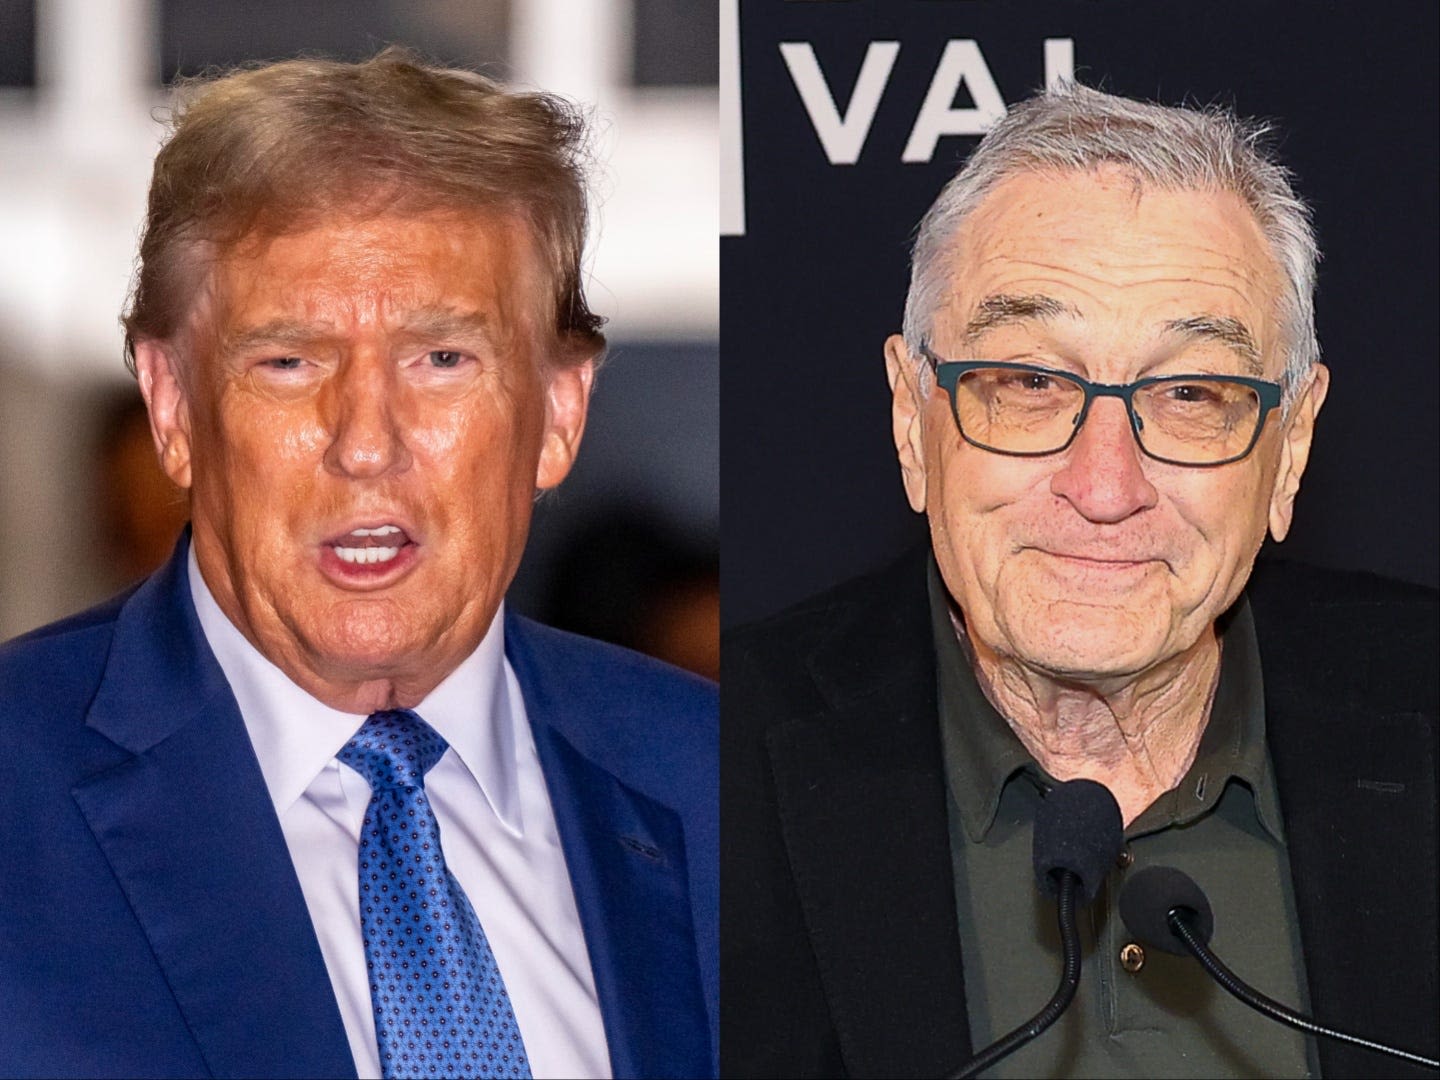 Robert De Niro called Donald Trump a 'clown' and a 'monster' outside his New York hush money trial. Here's a timeline of their 13-year feud.